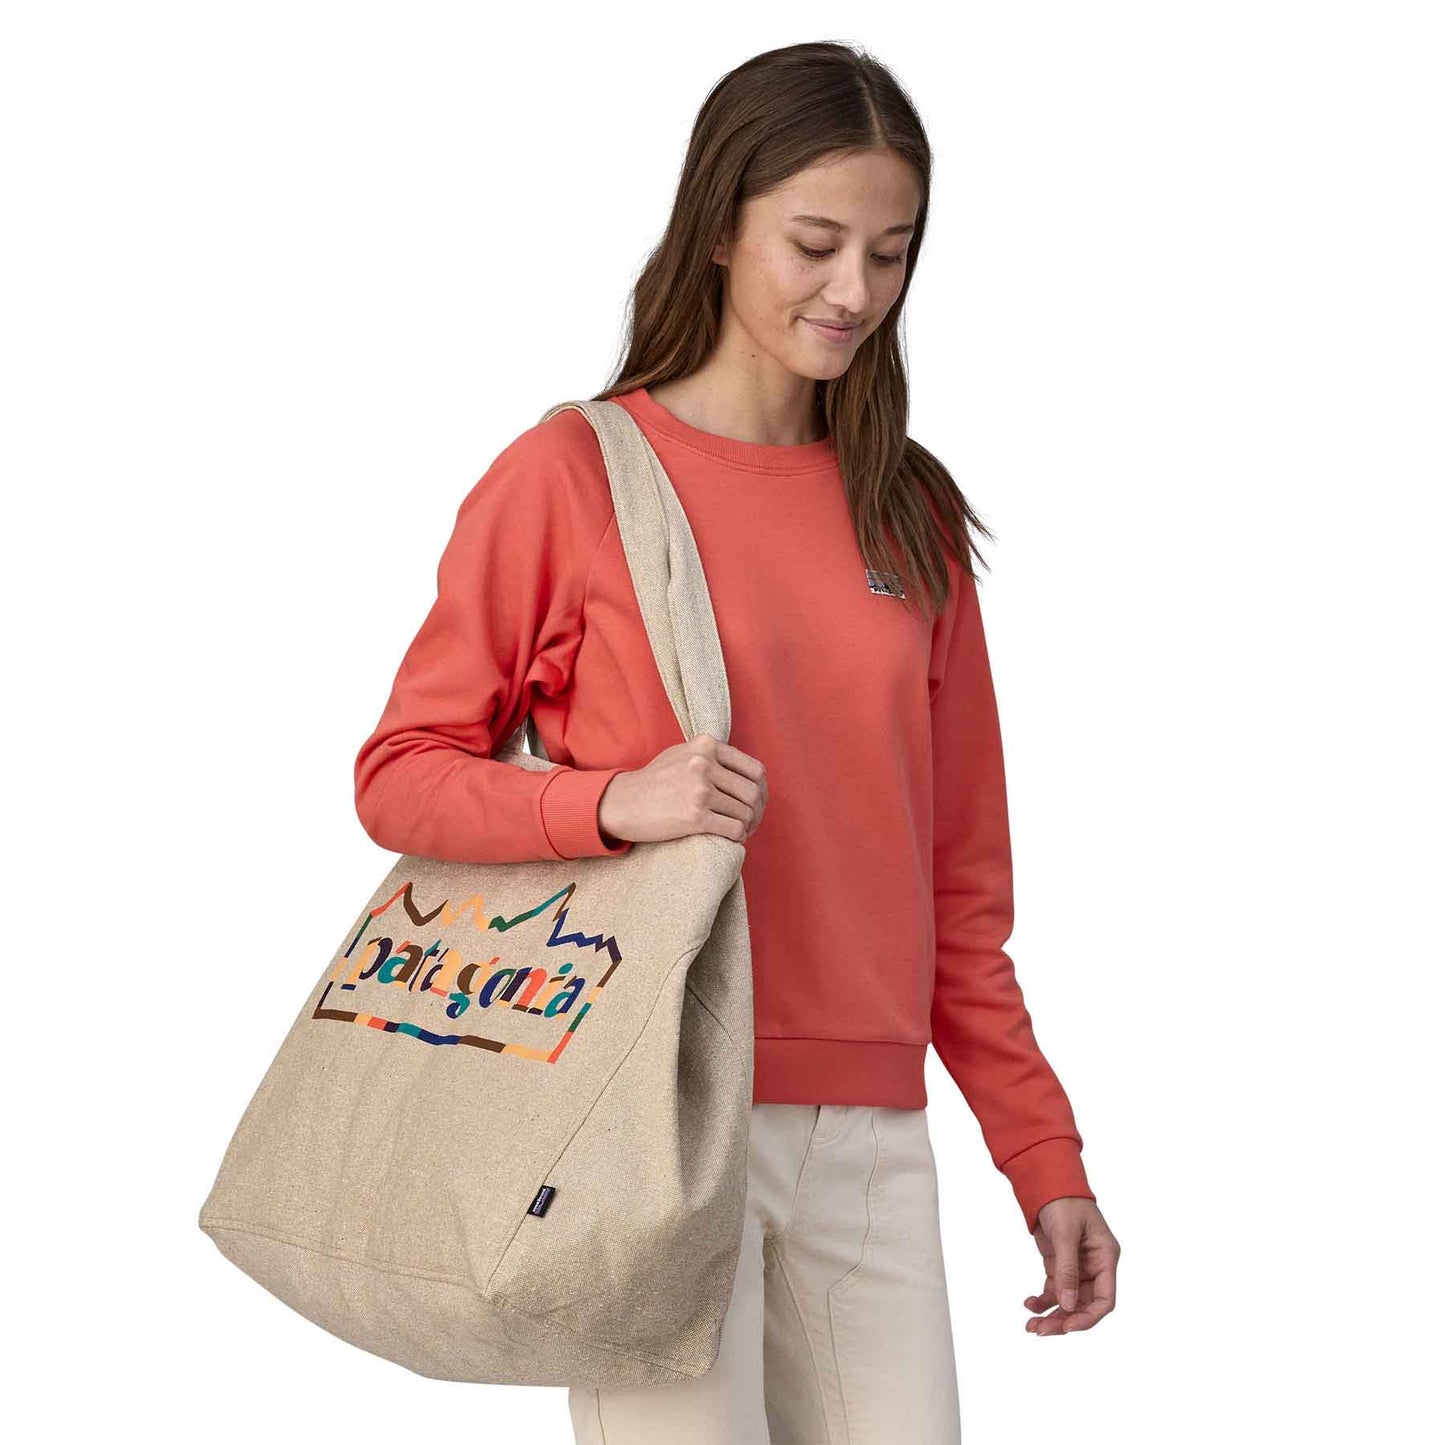 Patagonia®Recycled Oversized Tote